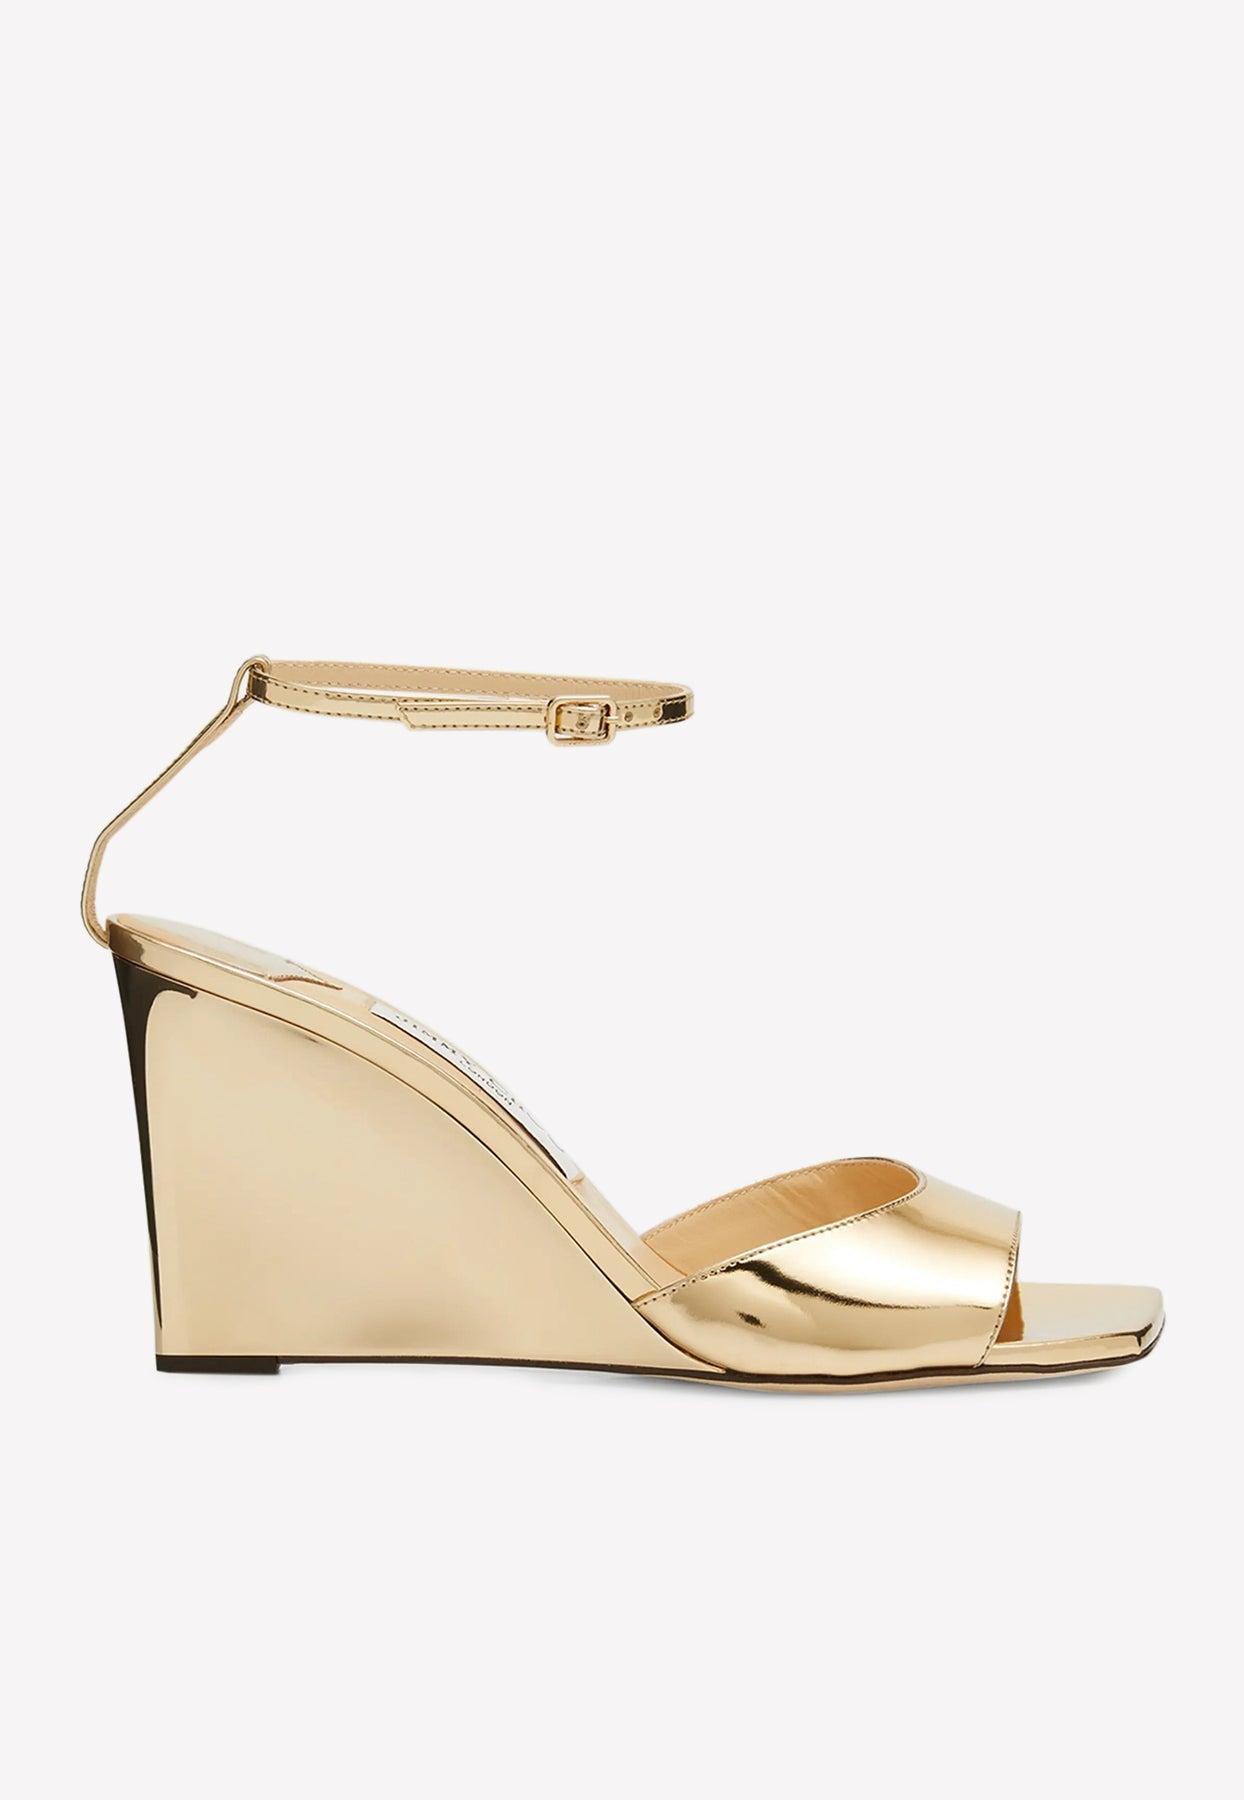 Jimmy Choo Brien 85 Wedge Sandals In Metallic Leather in Natural | Lyst